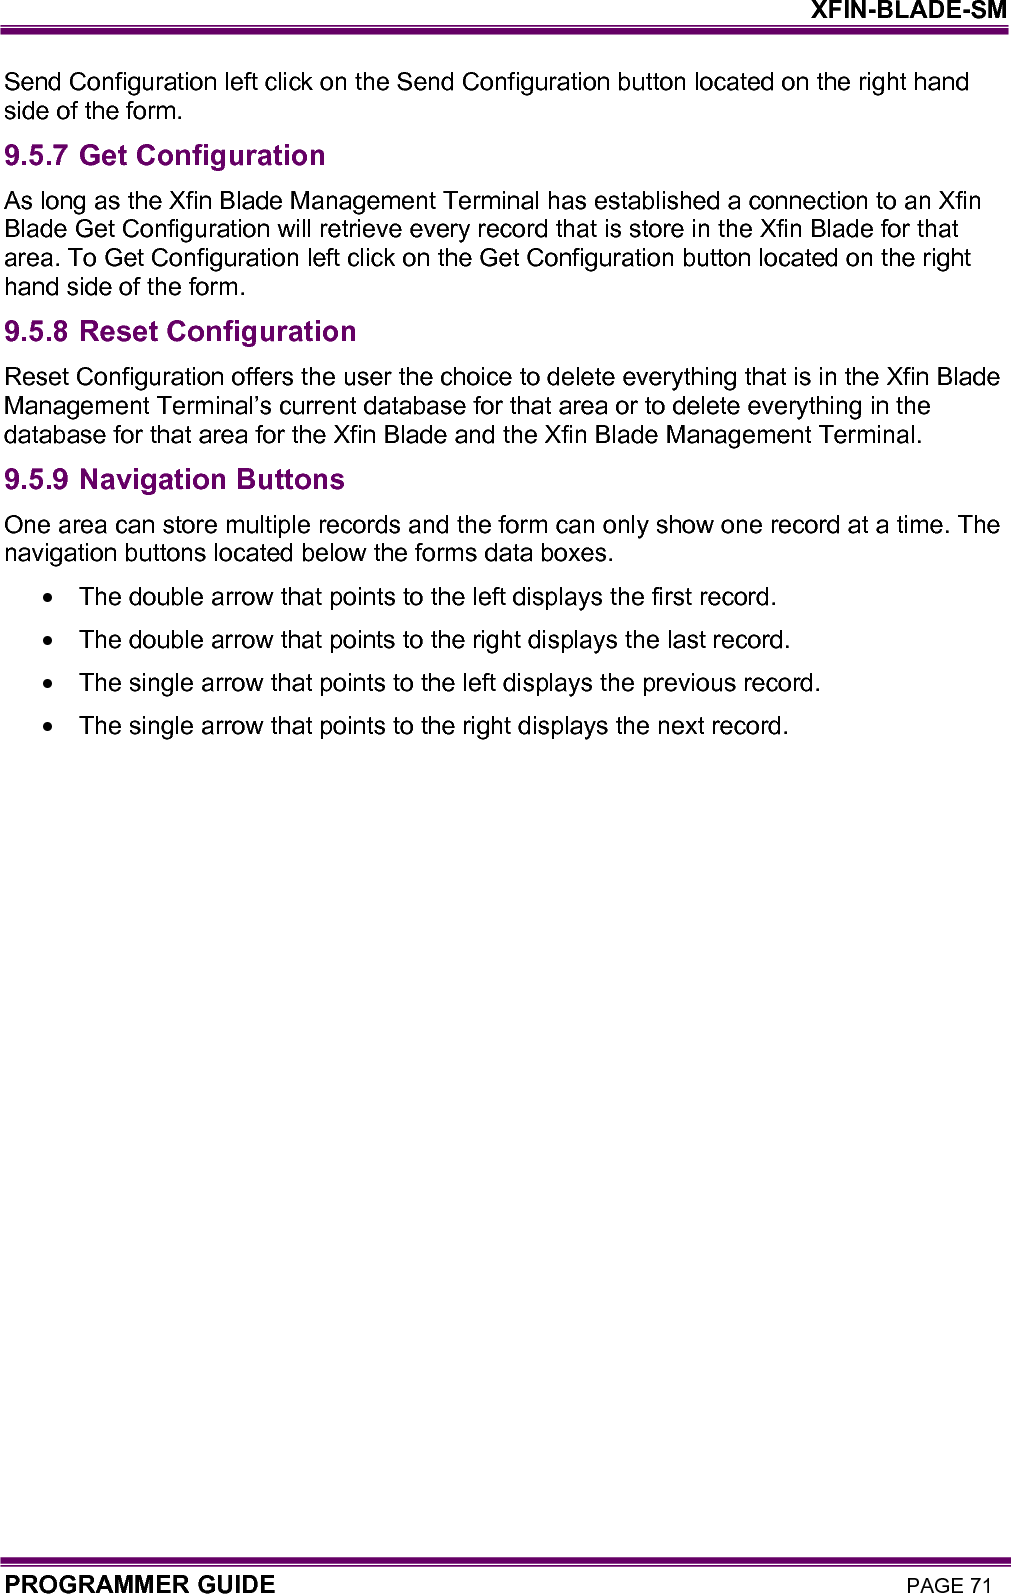 PAGE 72  PROGRAMMER GUIDE       